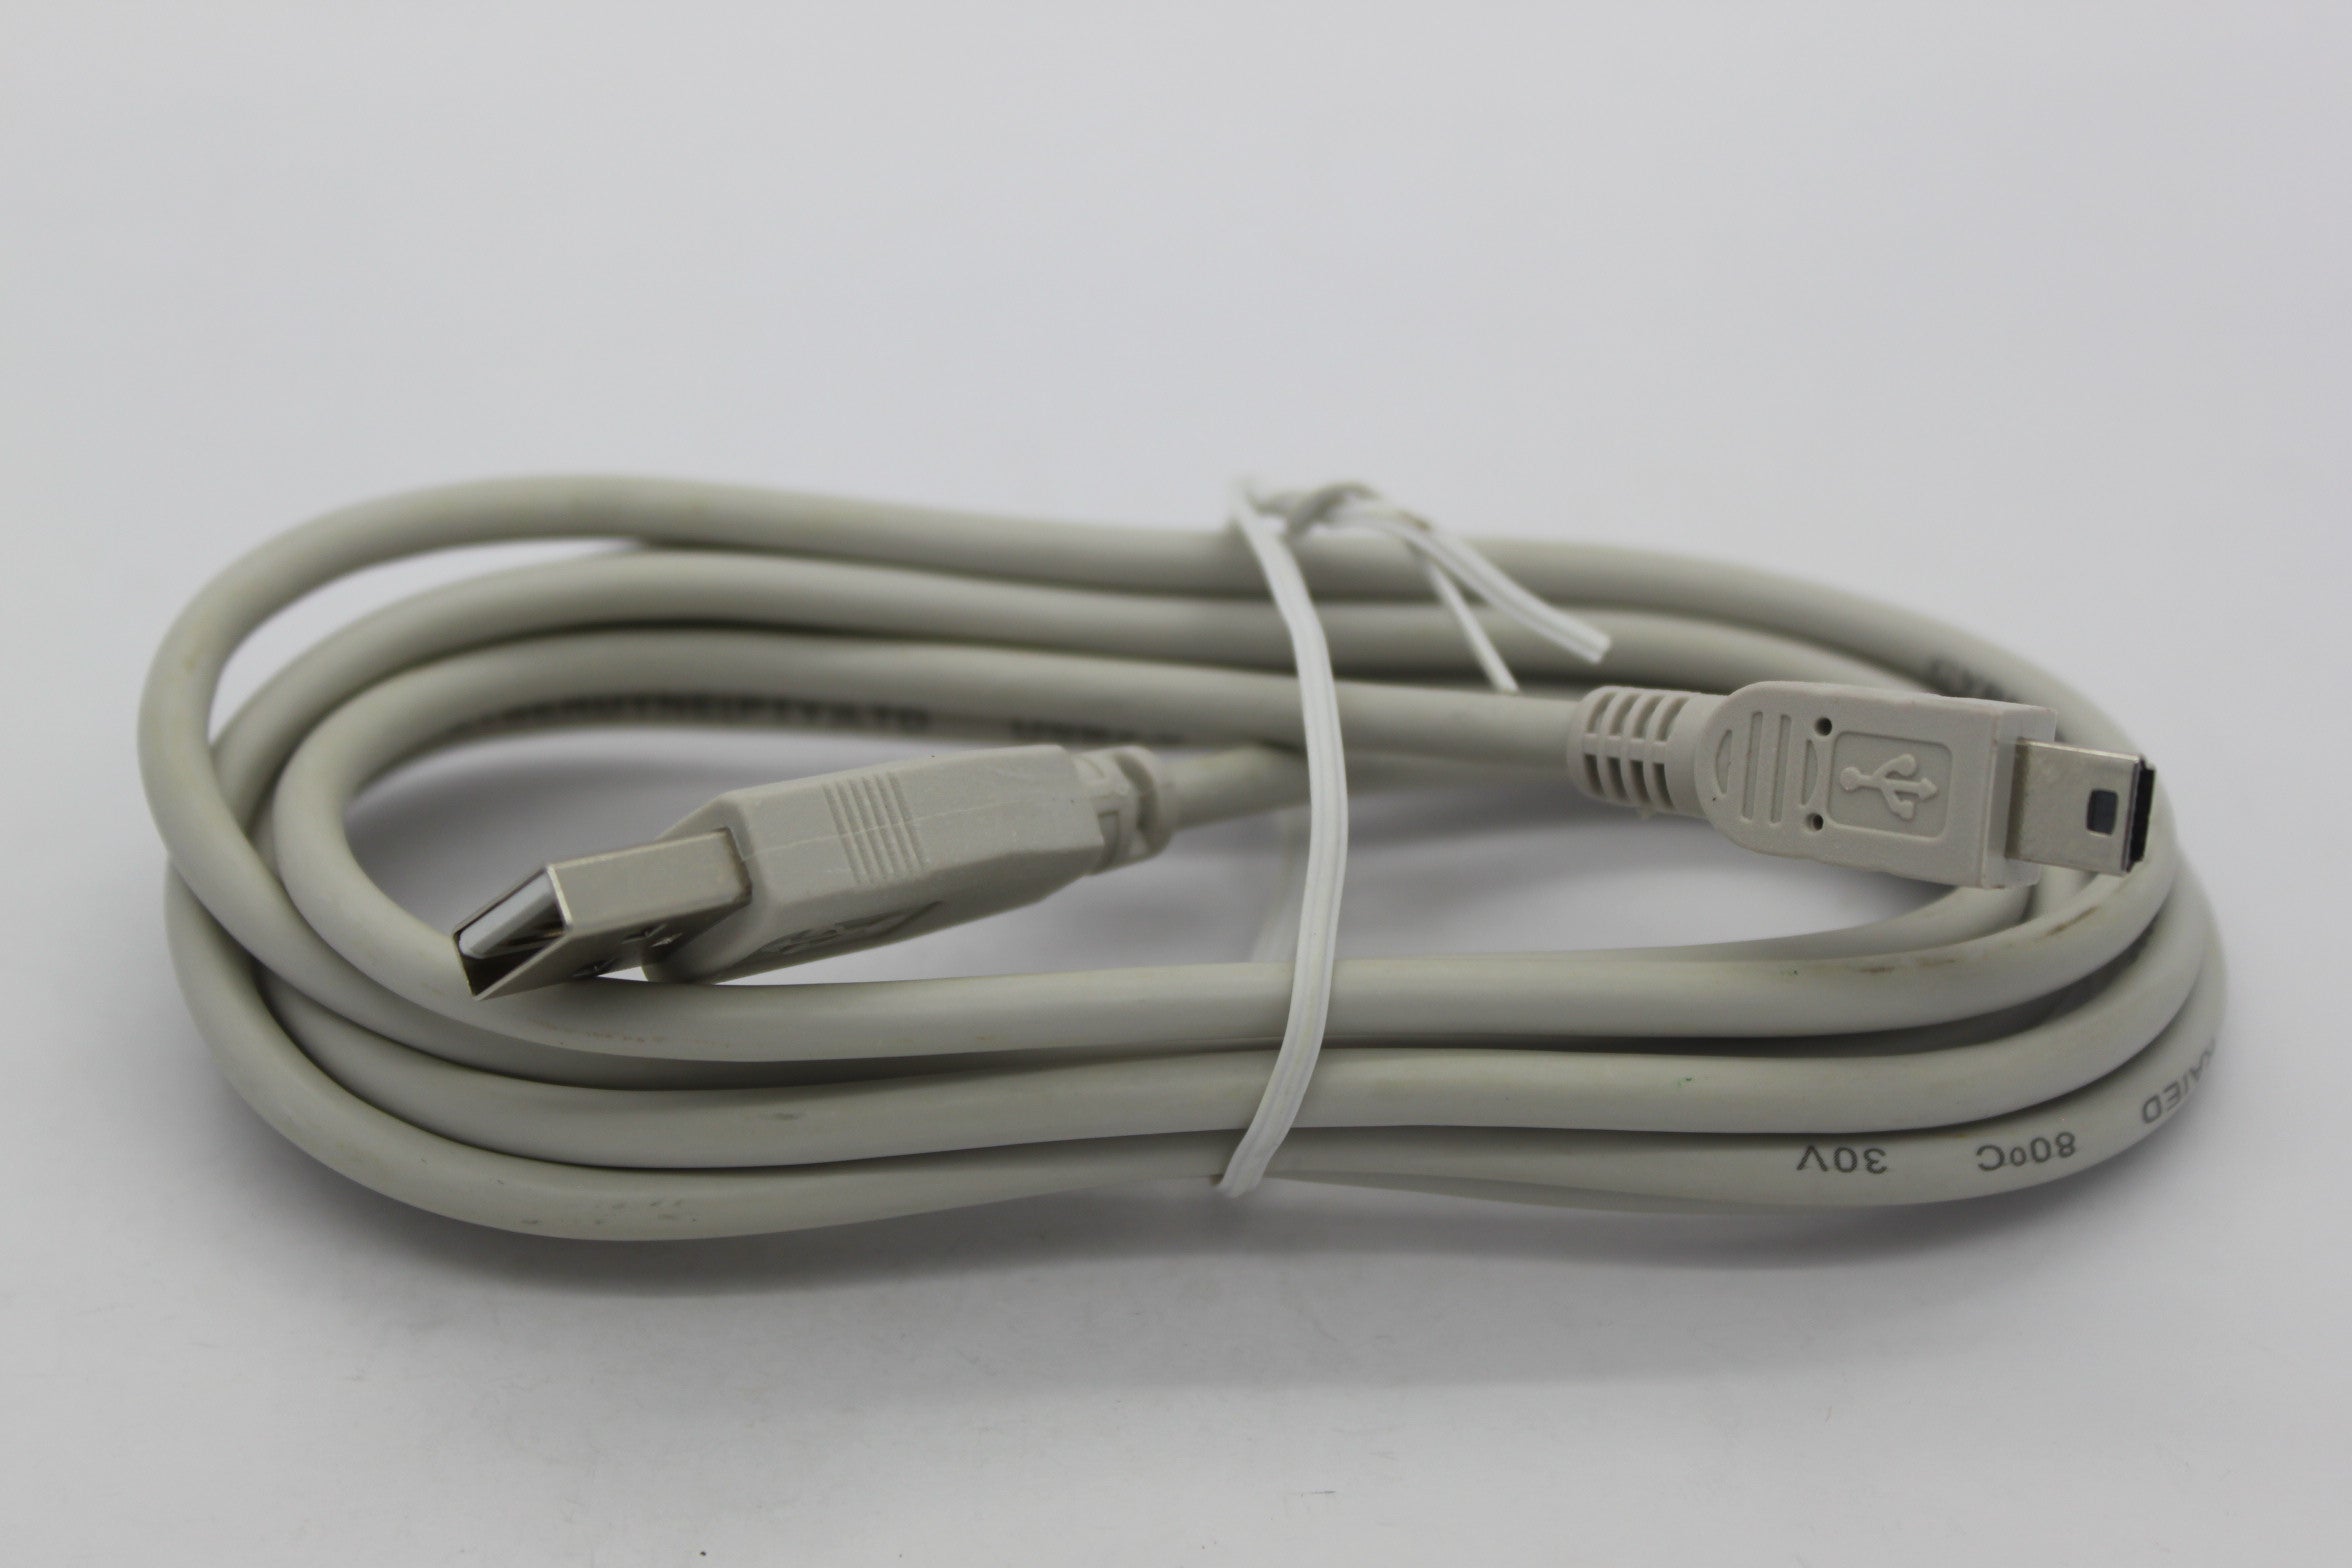 USB Type A to Mini USB Cable (1.8 Meter) Cyberdyne USB Cables